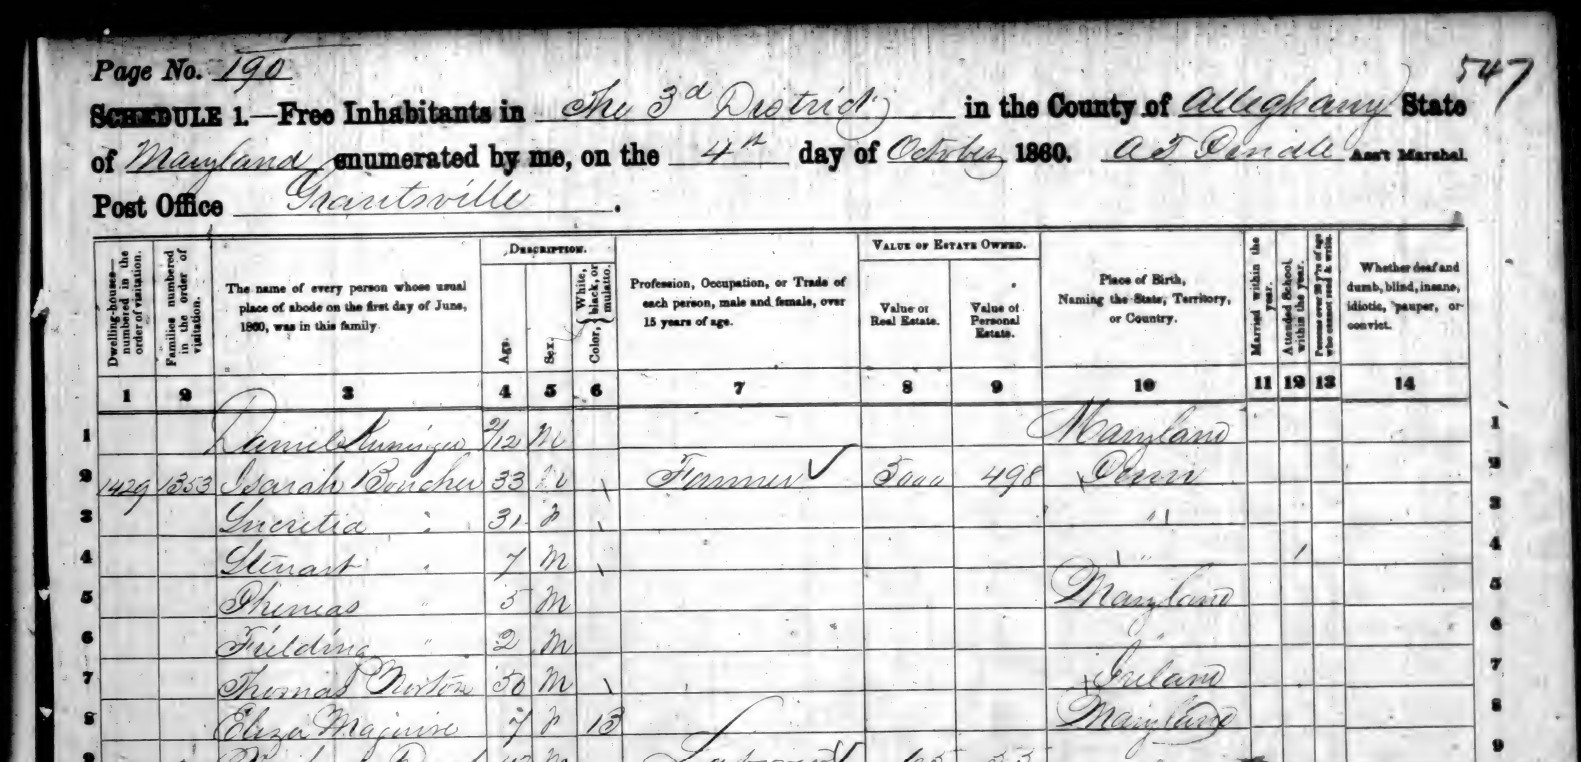 Isaiah Boucher in the 1860 census of Allegany County, Maryland.